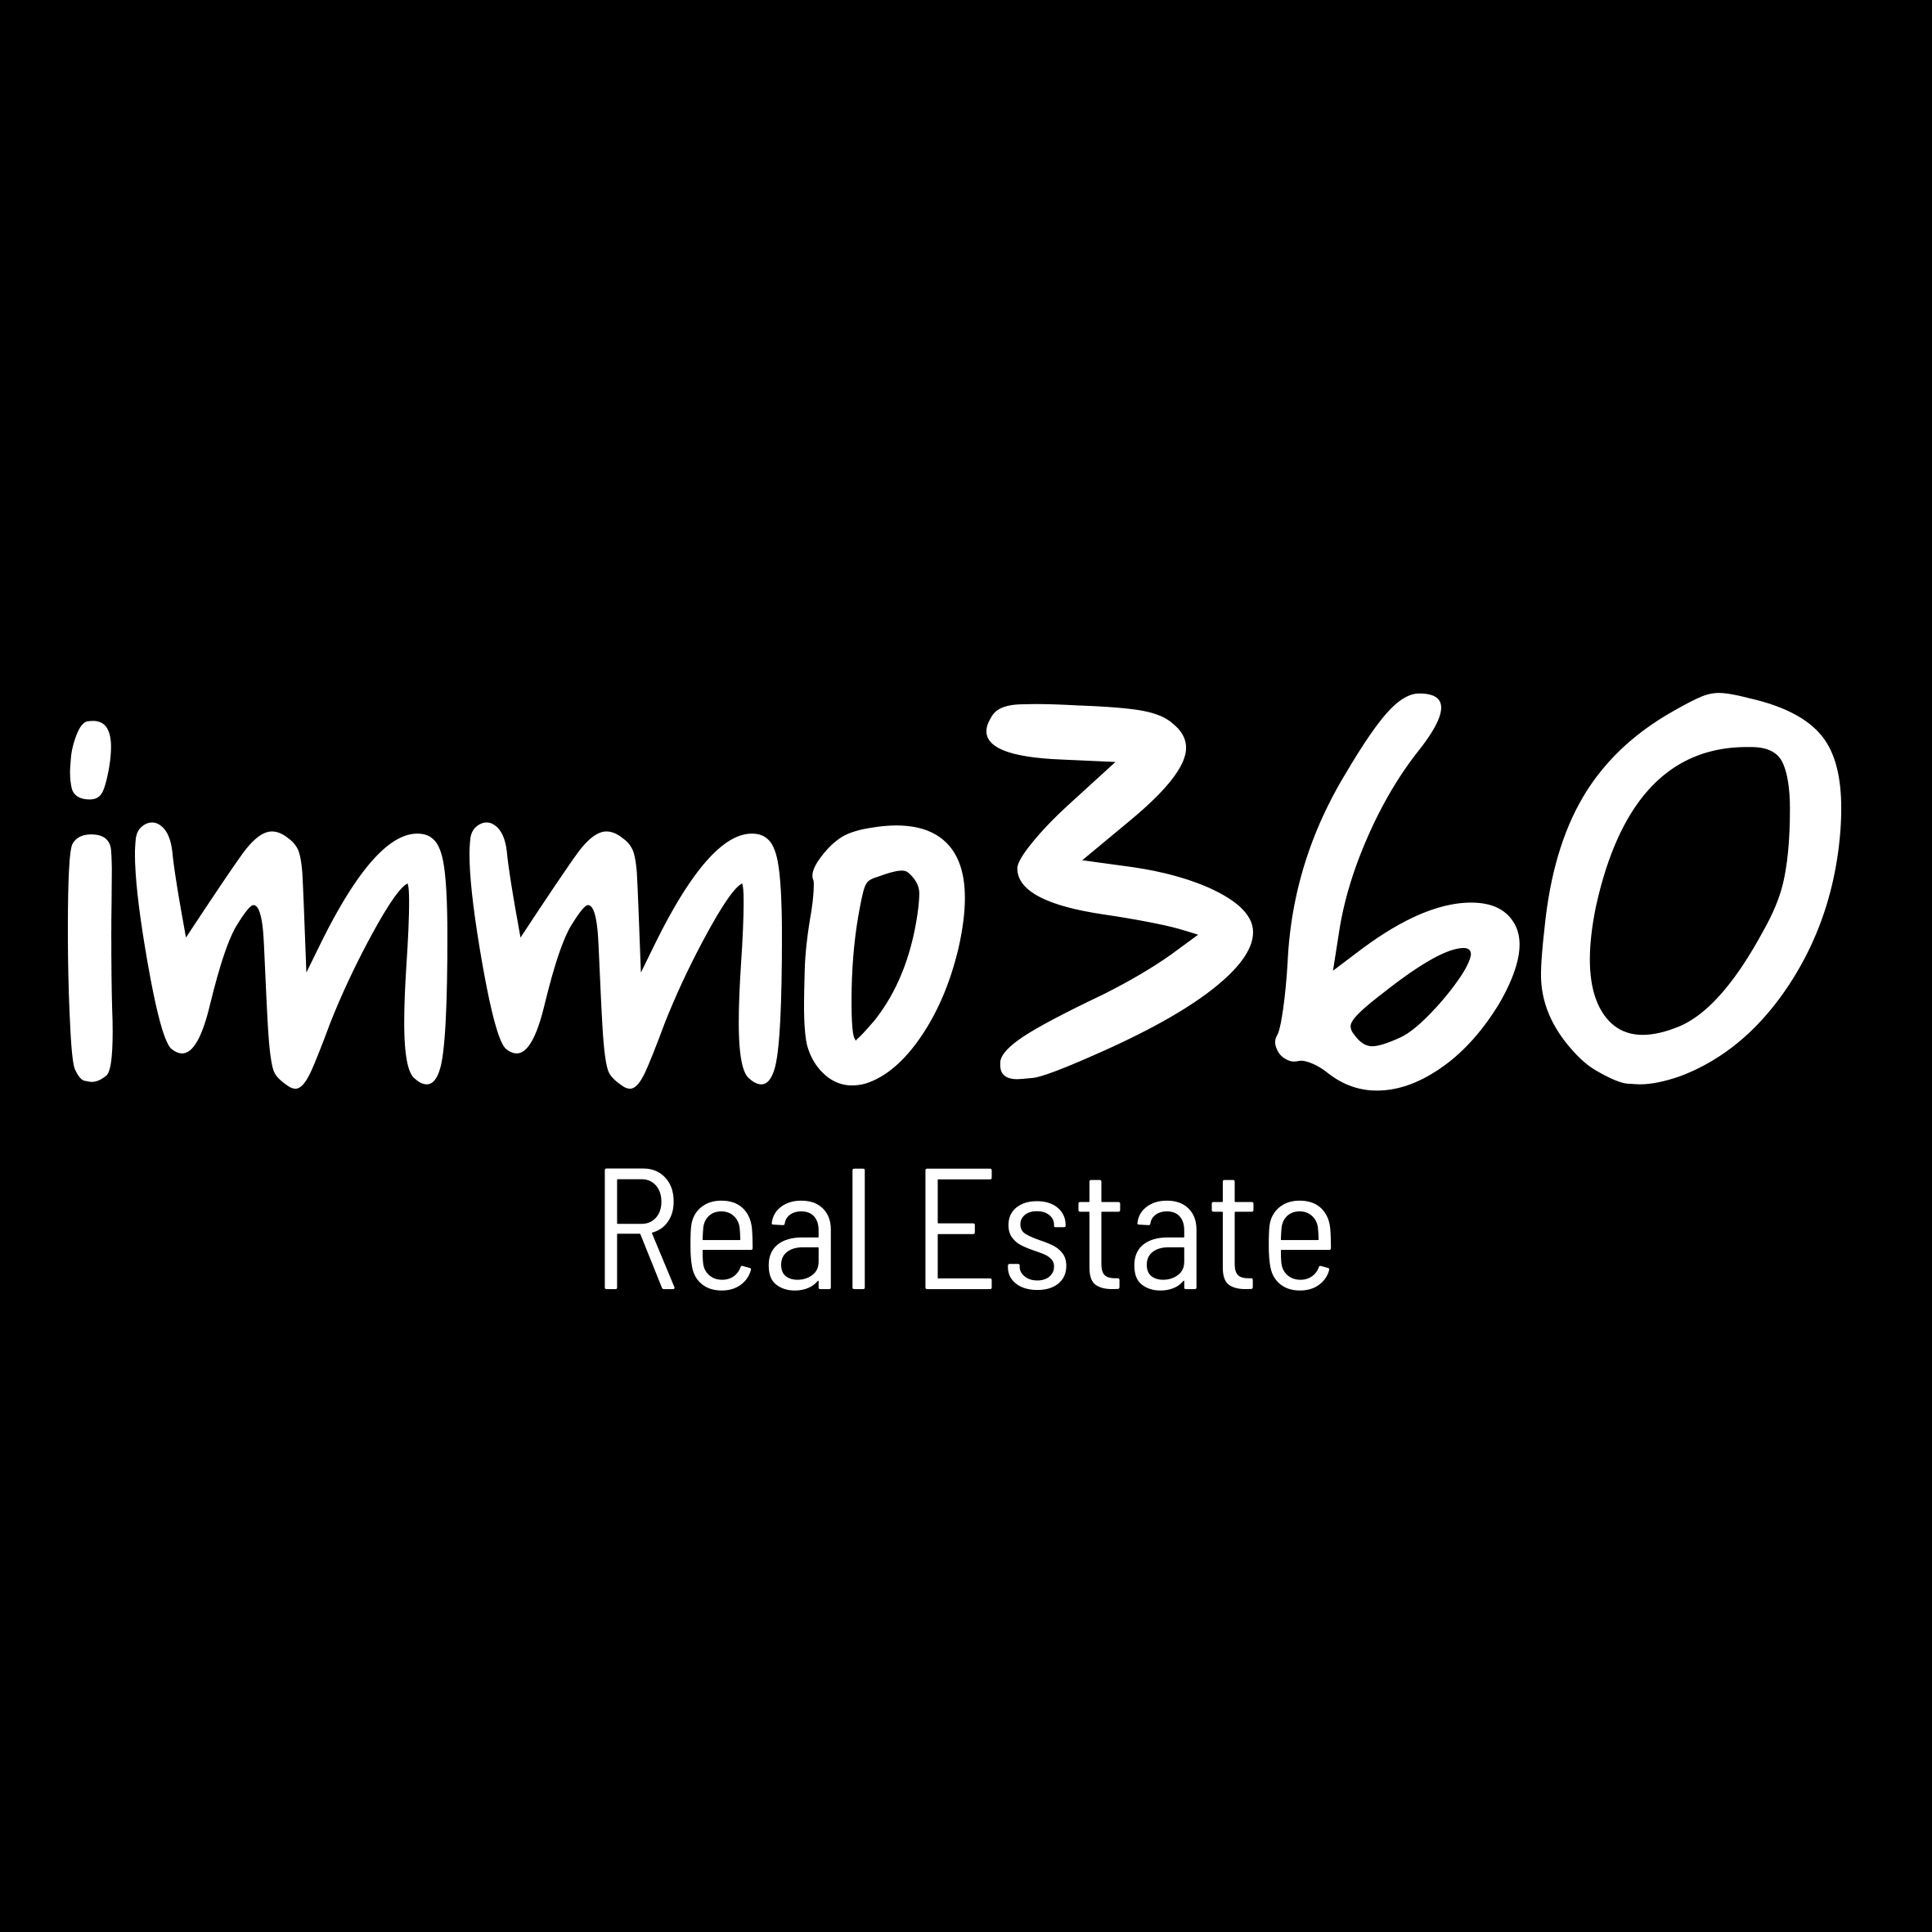 IMMO360 REAL ESTATE